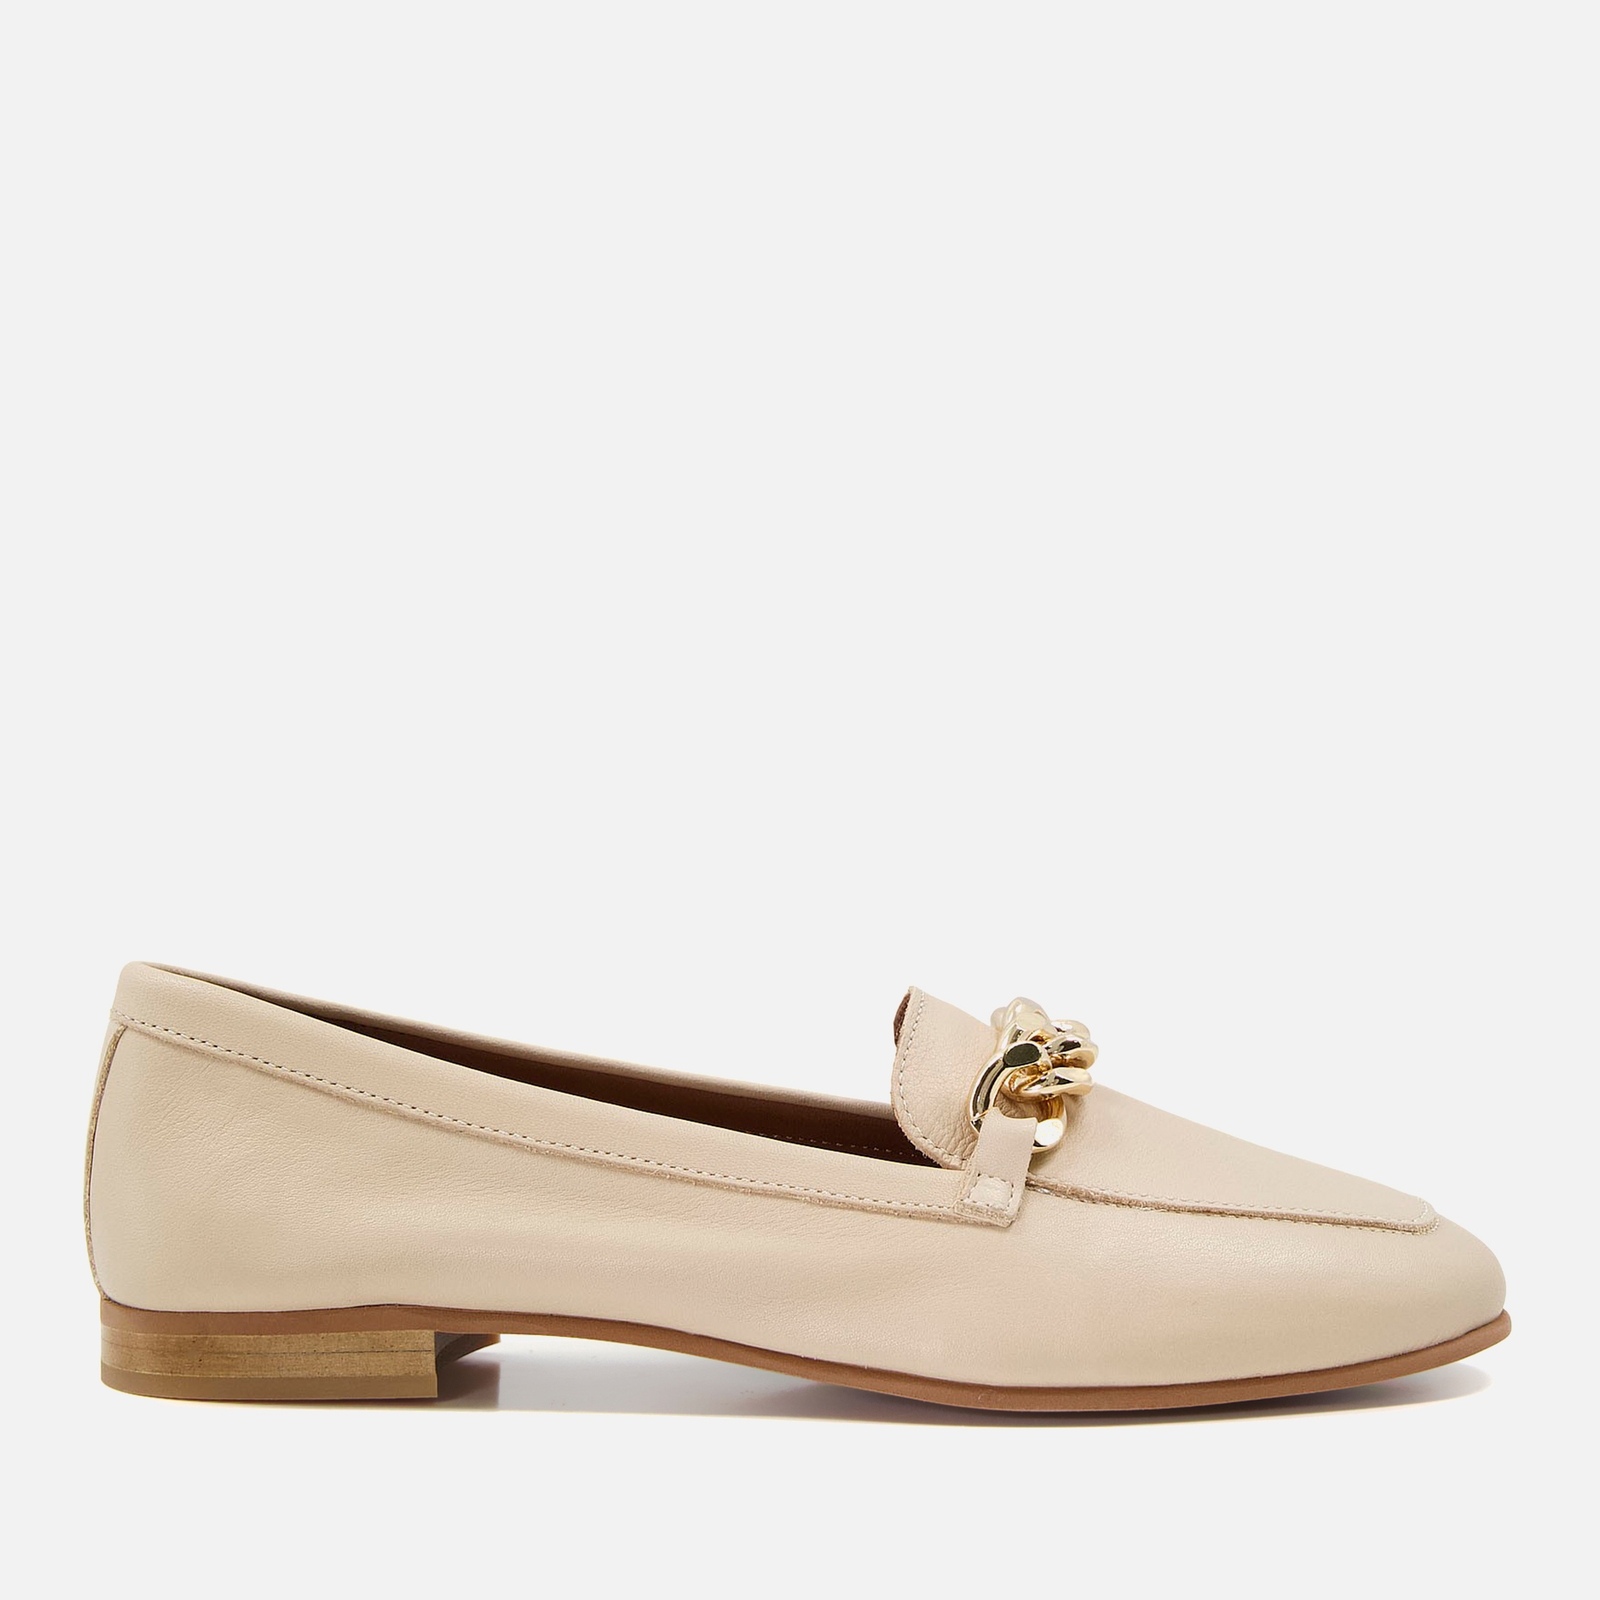 Dune Women’s Goldsmith Leather Loafers